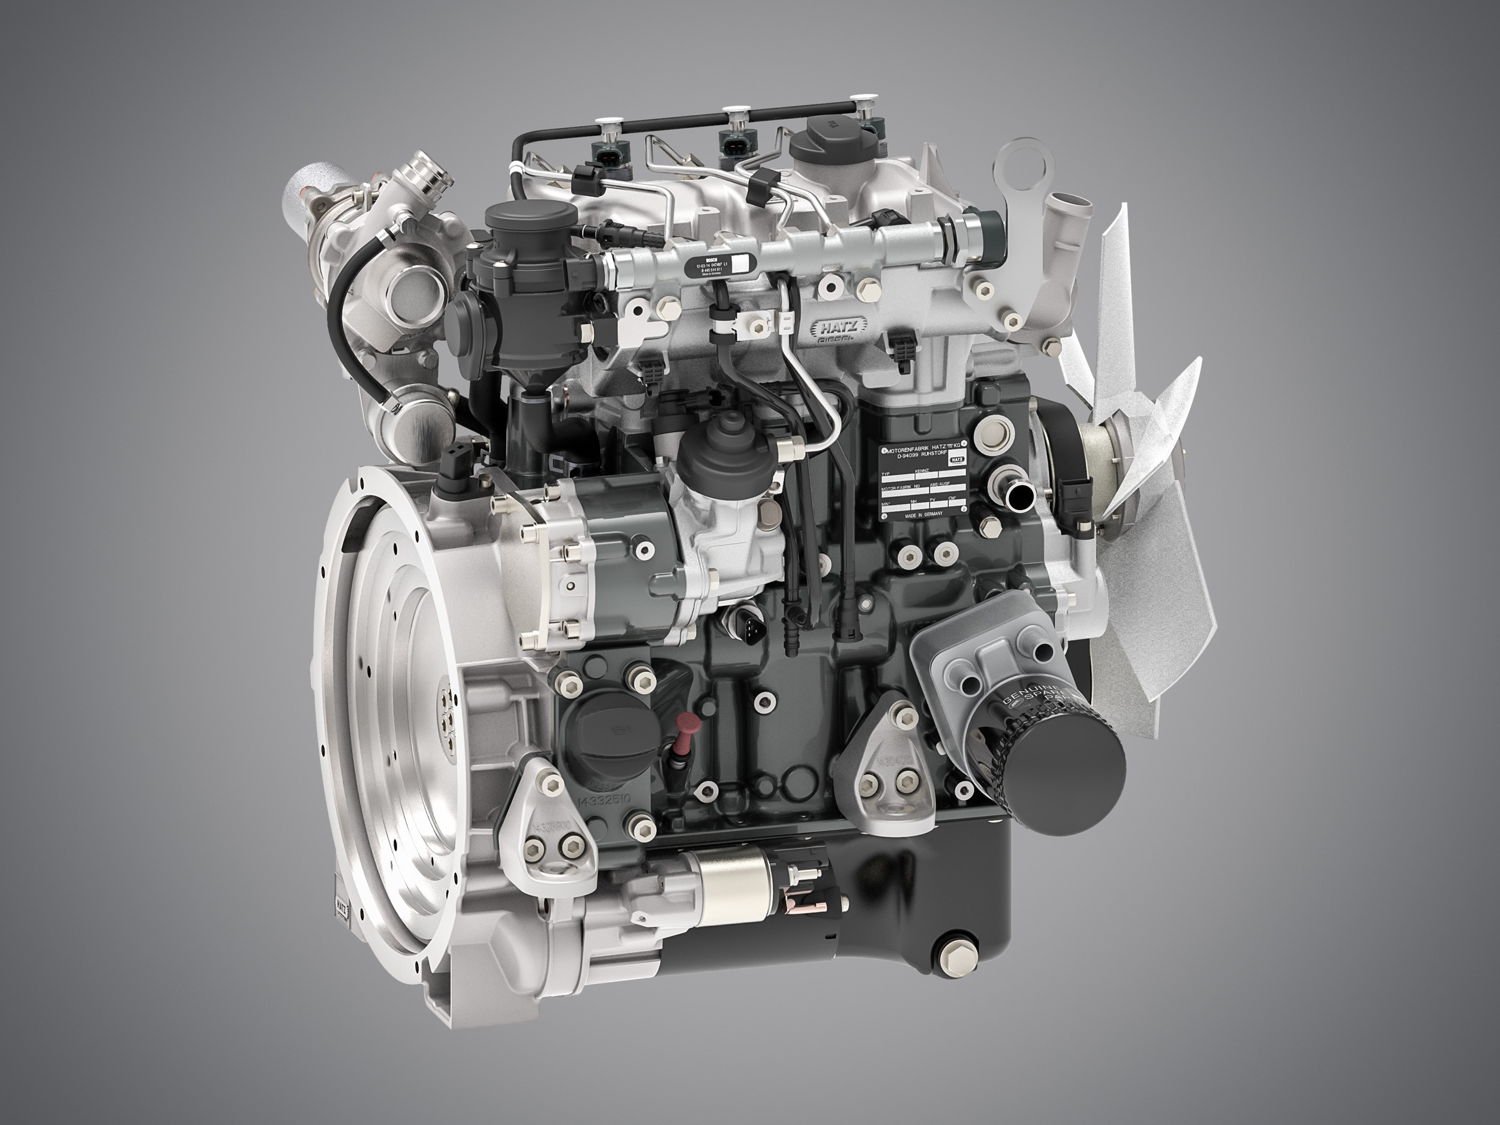 New Hatz H-series 3H50T three-cylinder engine: compact engine in the version with 18.4 kilowatts, EU Stage V compliant, without DPF